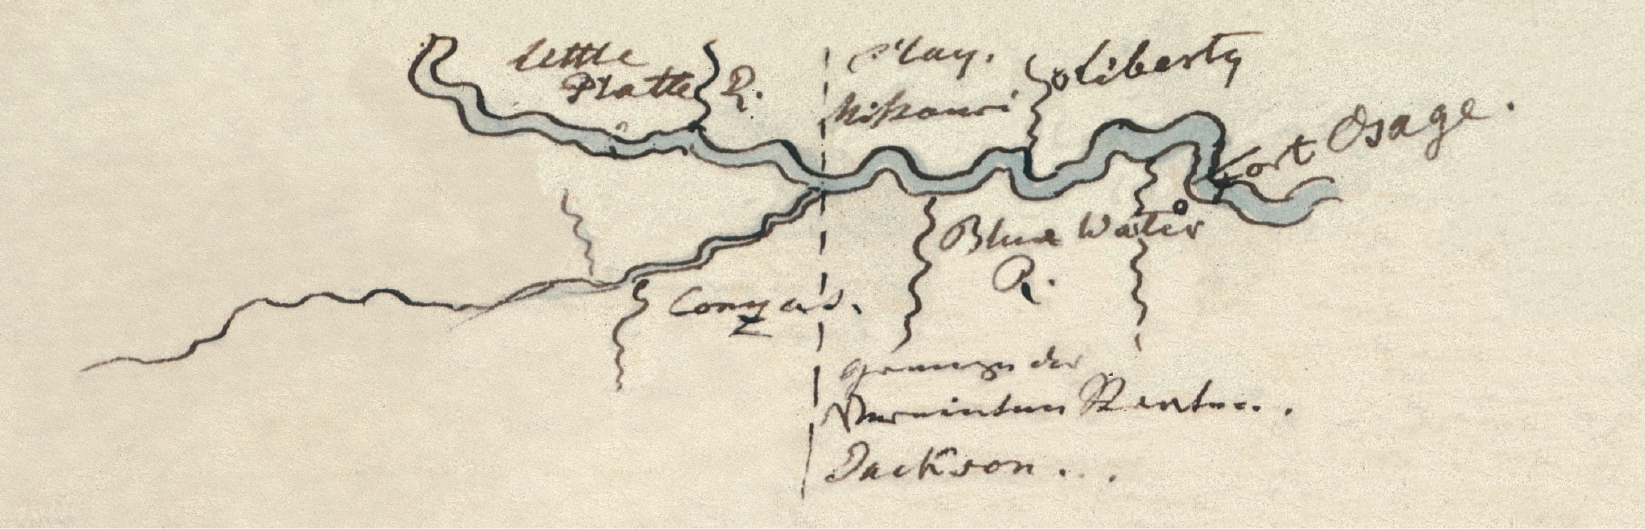 Figure 7.29. Map of the region around Liberty, Missouri. Included are Clay and Jackson counties, Fort Osage, and the Kansas (“Conza”), Blue (“Blue Water”), and Platte (“Little Platte”) rivers. Th e dotted line marks “the border of the United States.” Probably copied from Maximilian’s 1831 Missouri map or a Tanner map of the period.